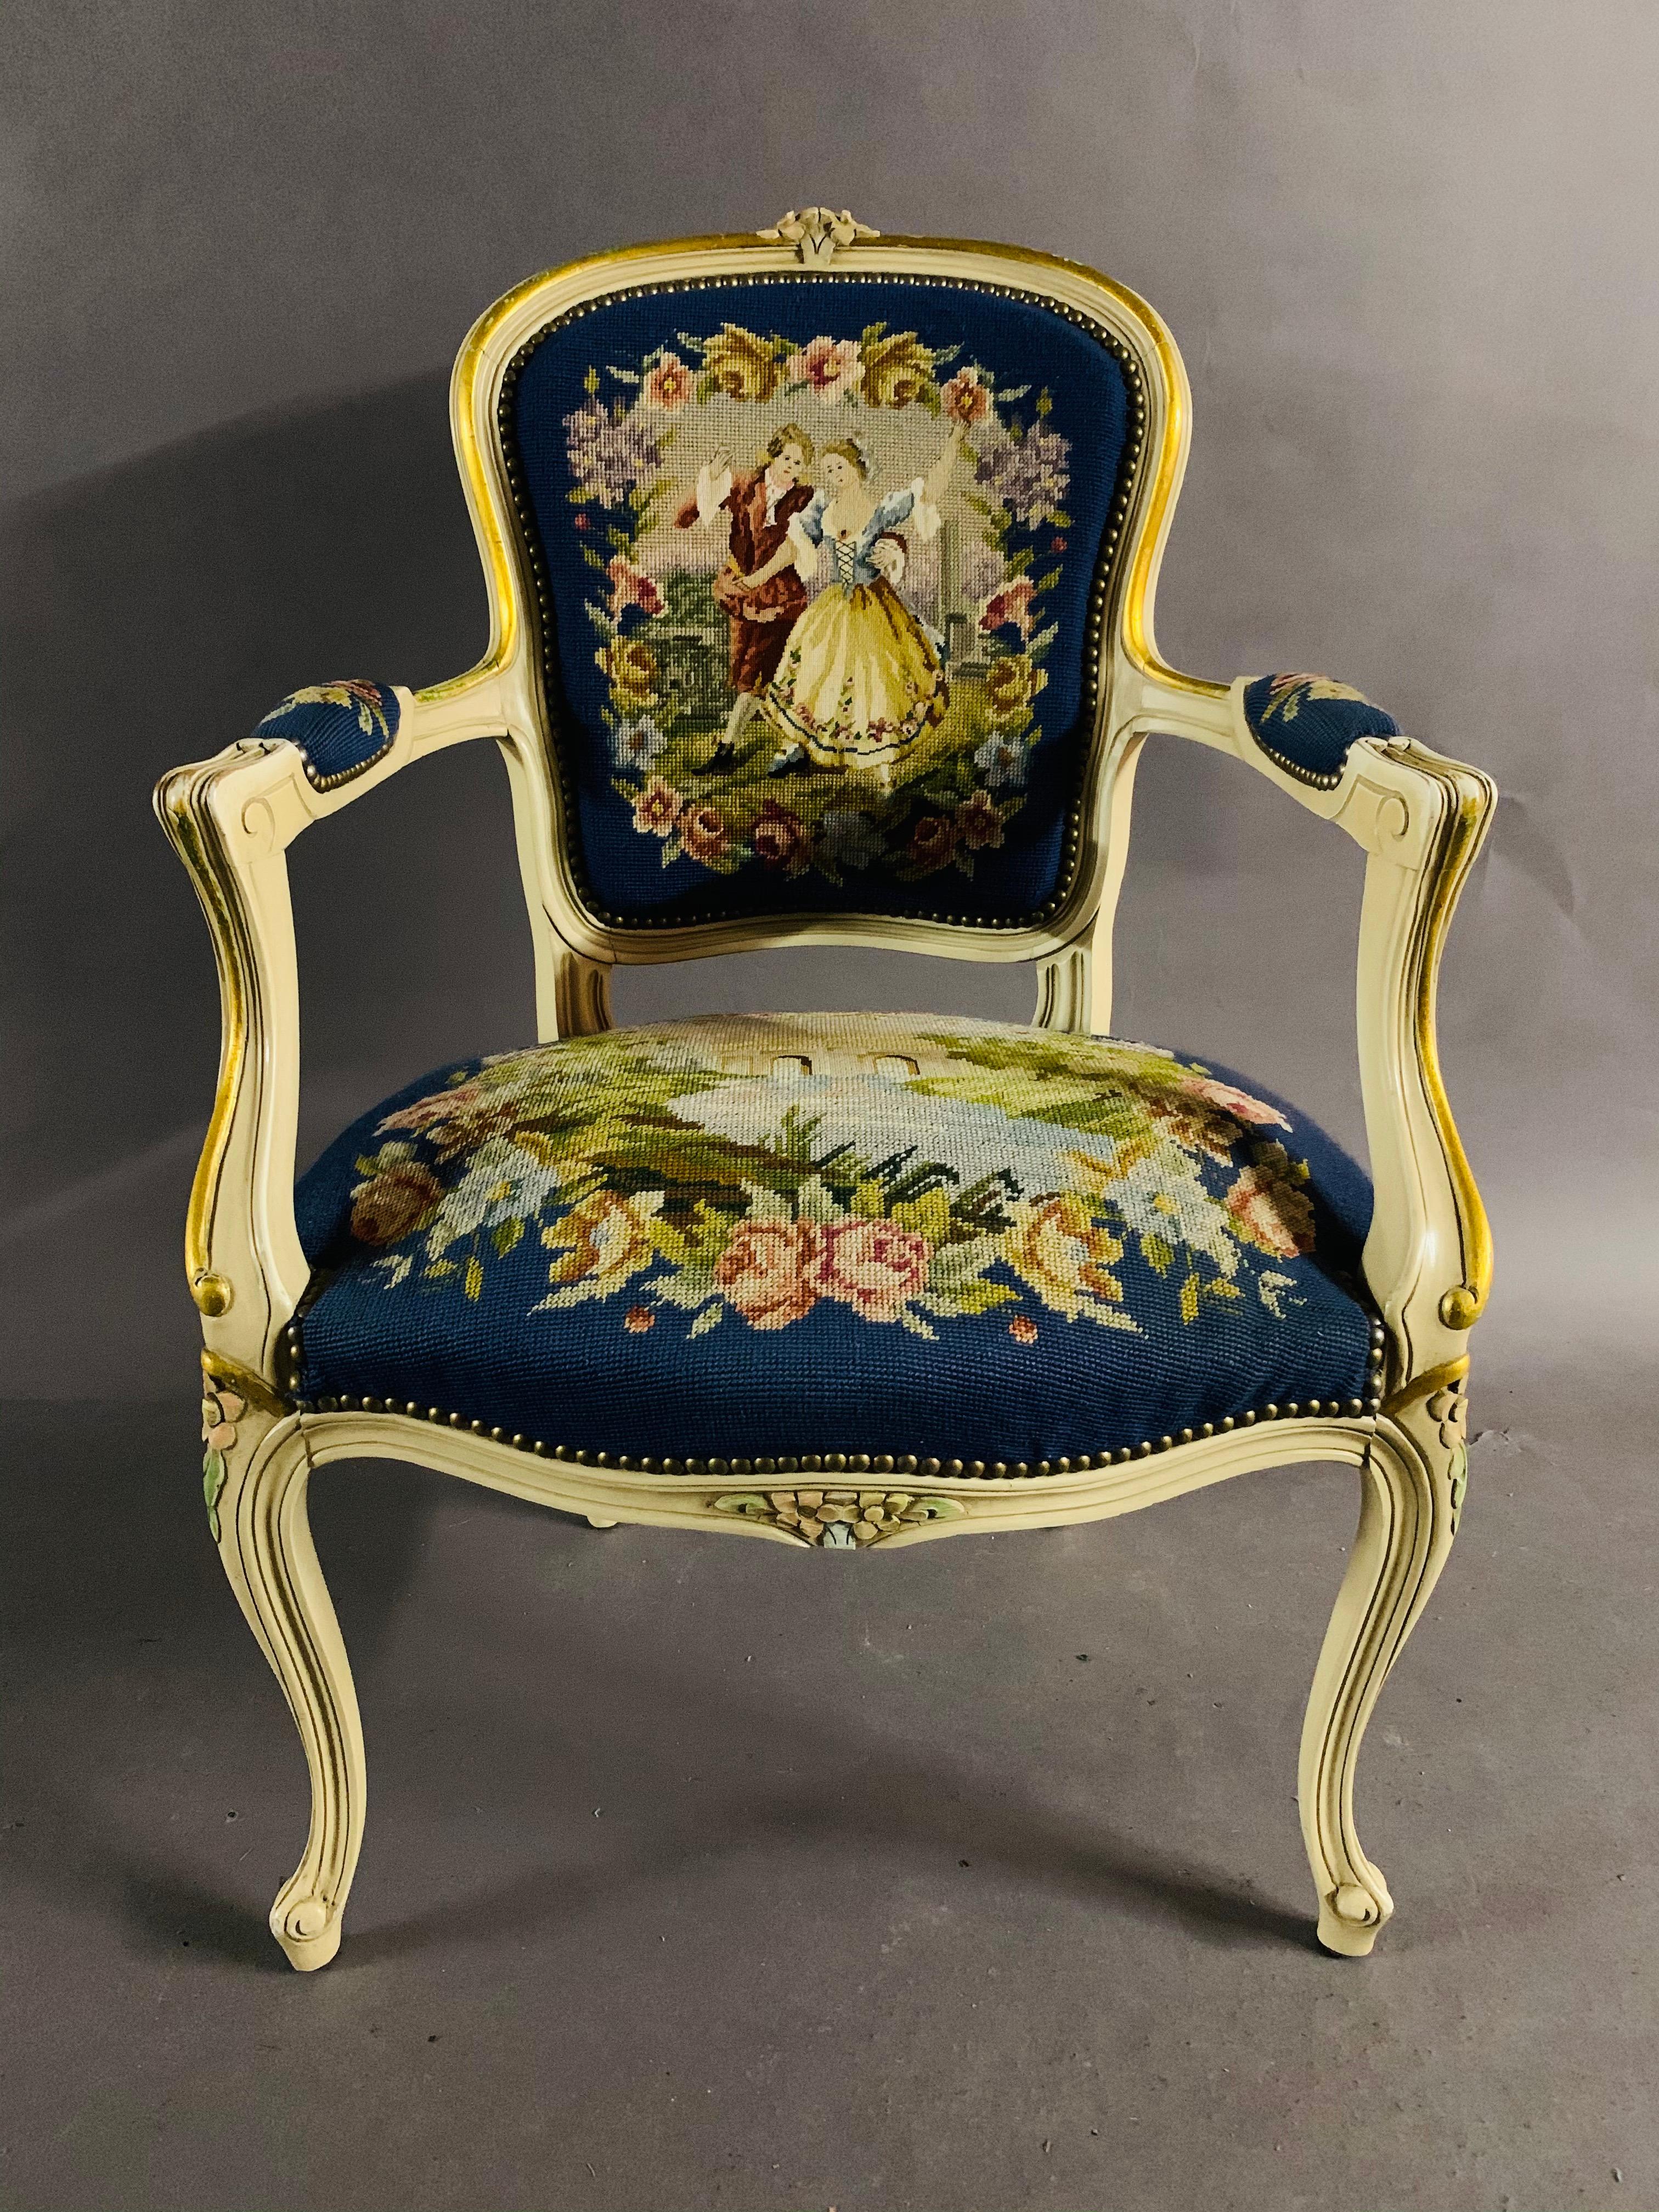 20th century beautiful armchair in Louis Quinze style with tapestry embroidery.

Measurements.
Height 92 cm
Width 62 cm
Depth 56 cm
Seat height 45 cm.